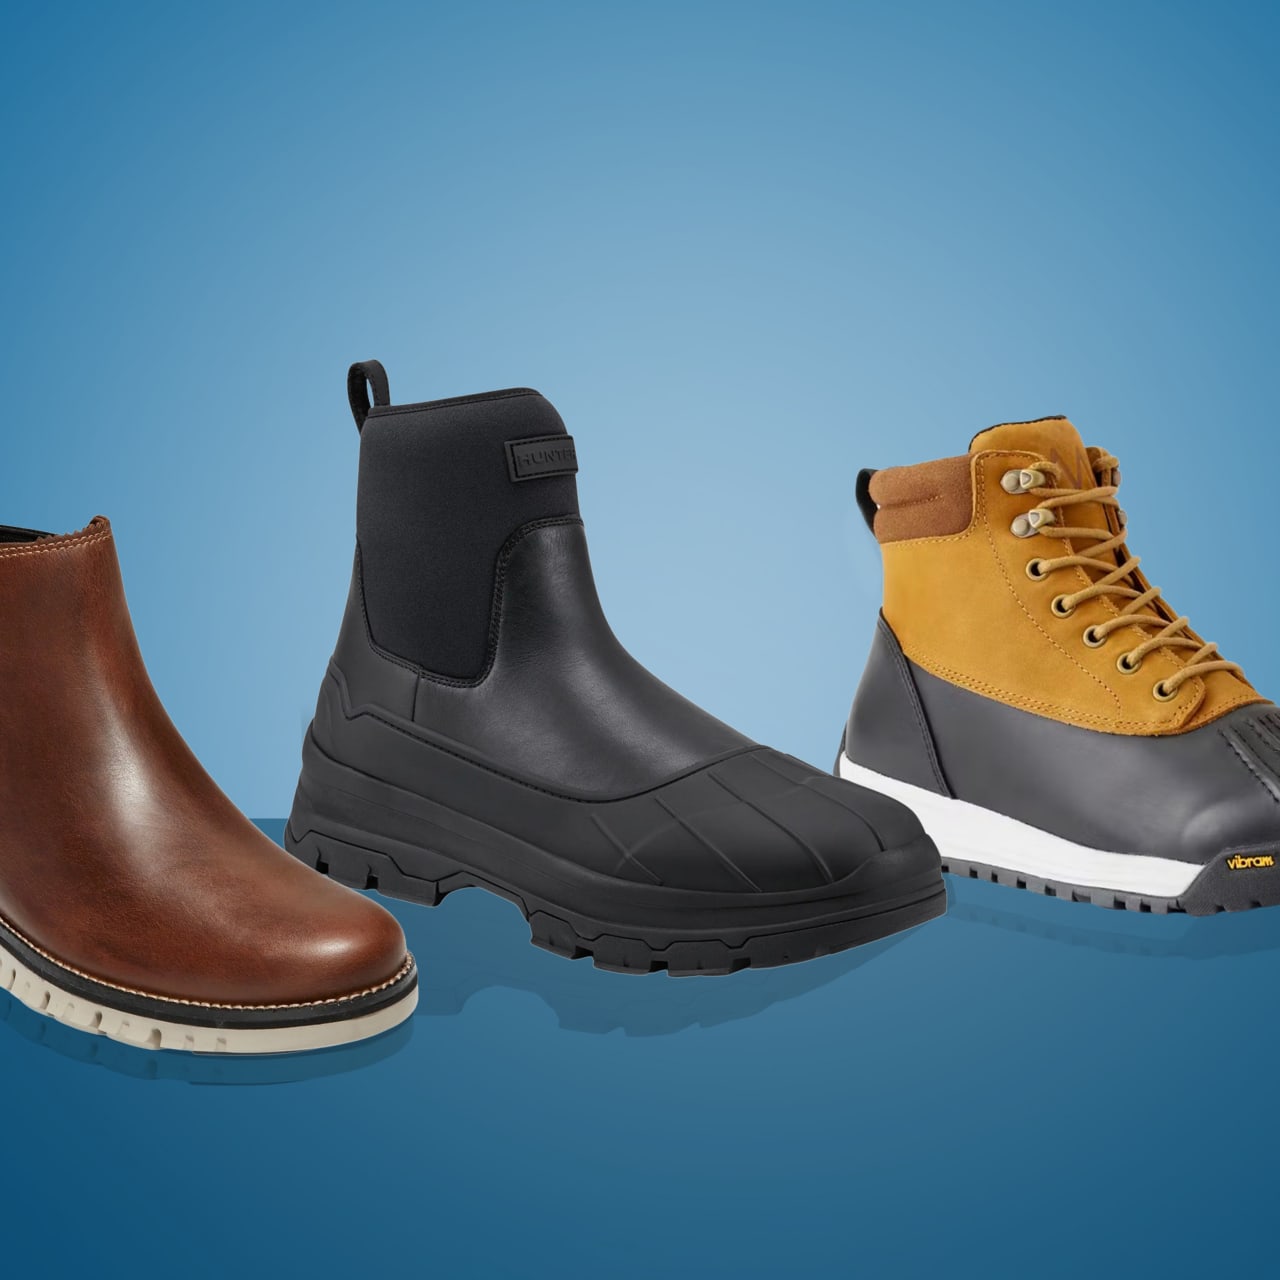 The Best Winter Boots for Men, According to Stylists - Buy Side from WSJ